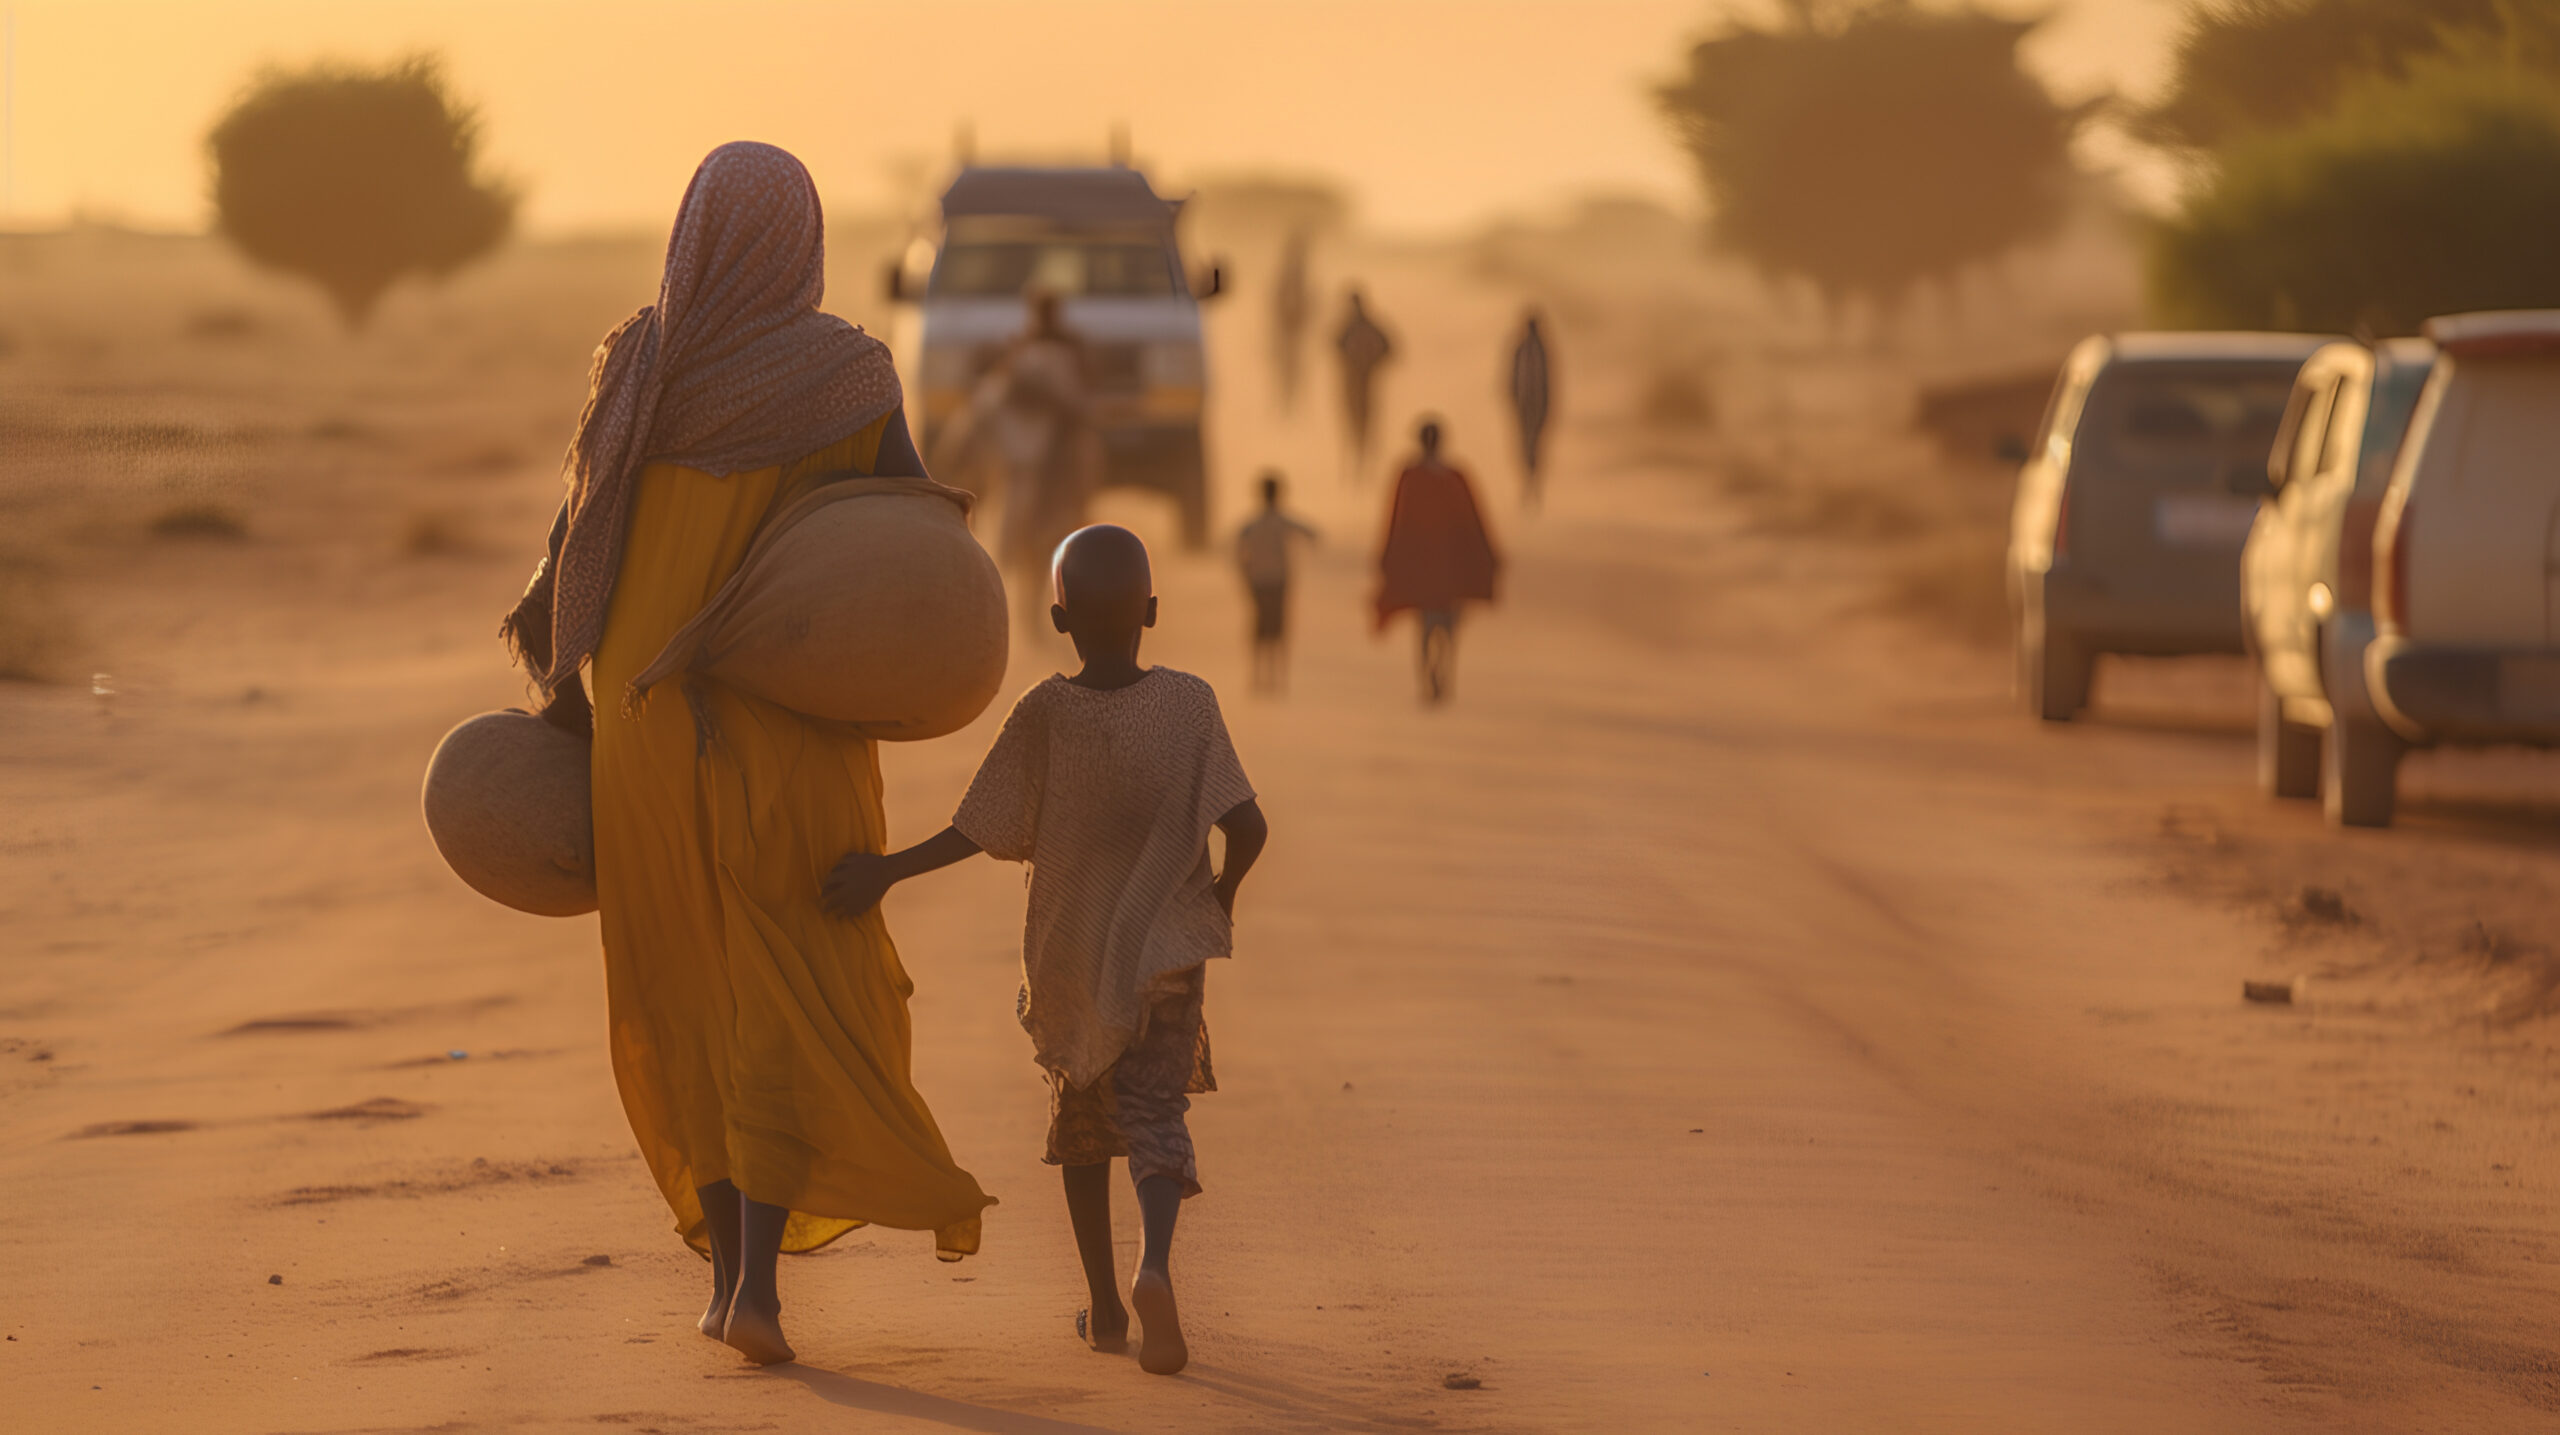 photo of mother and child walking away down a dirt road